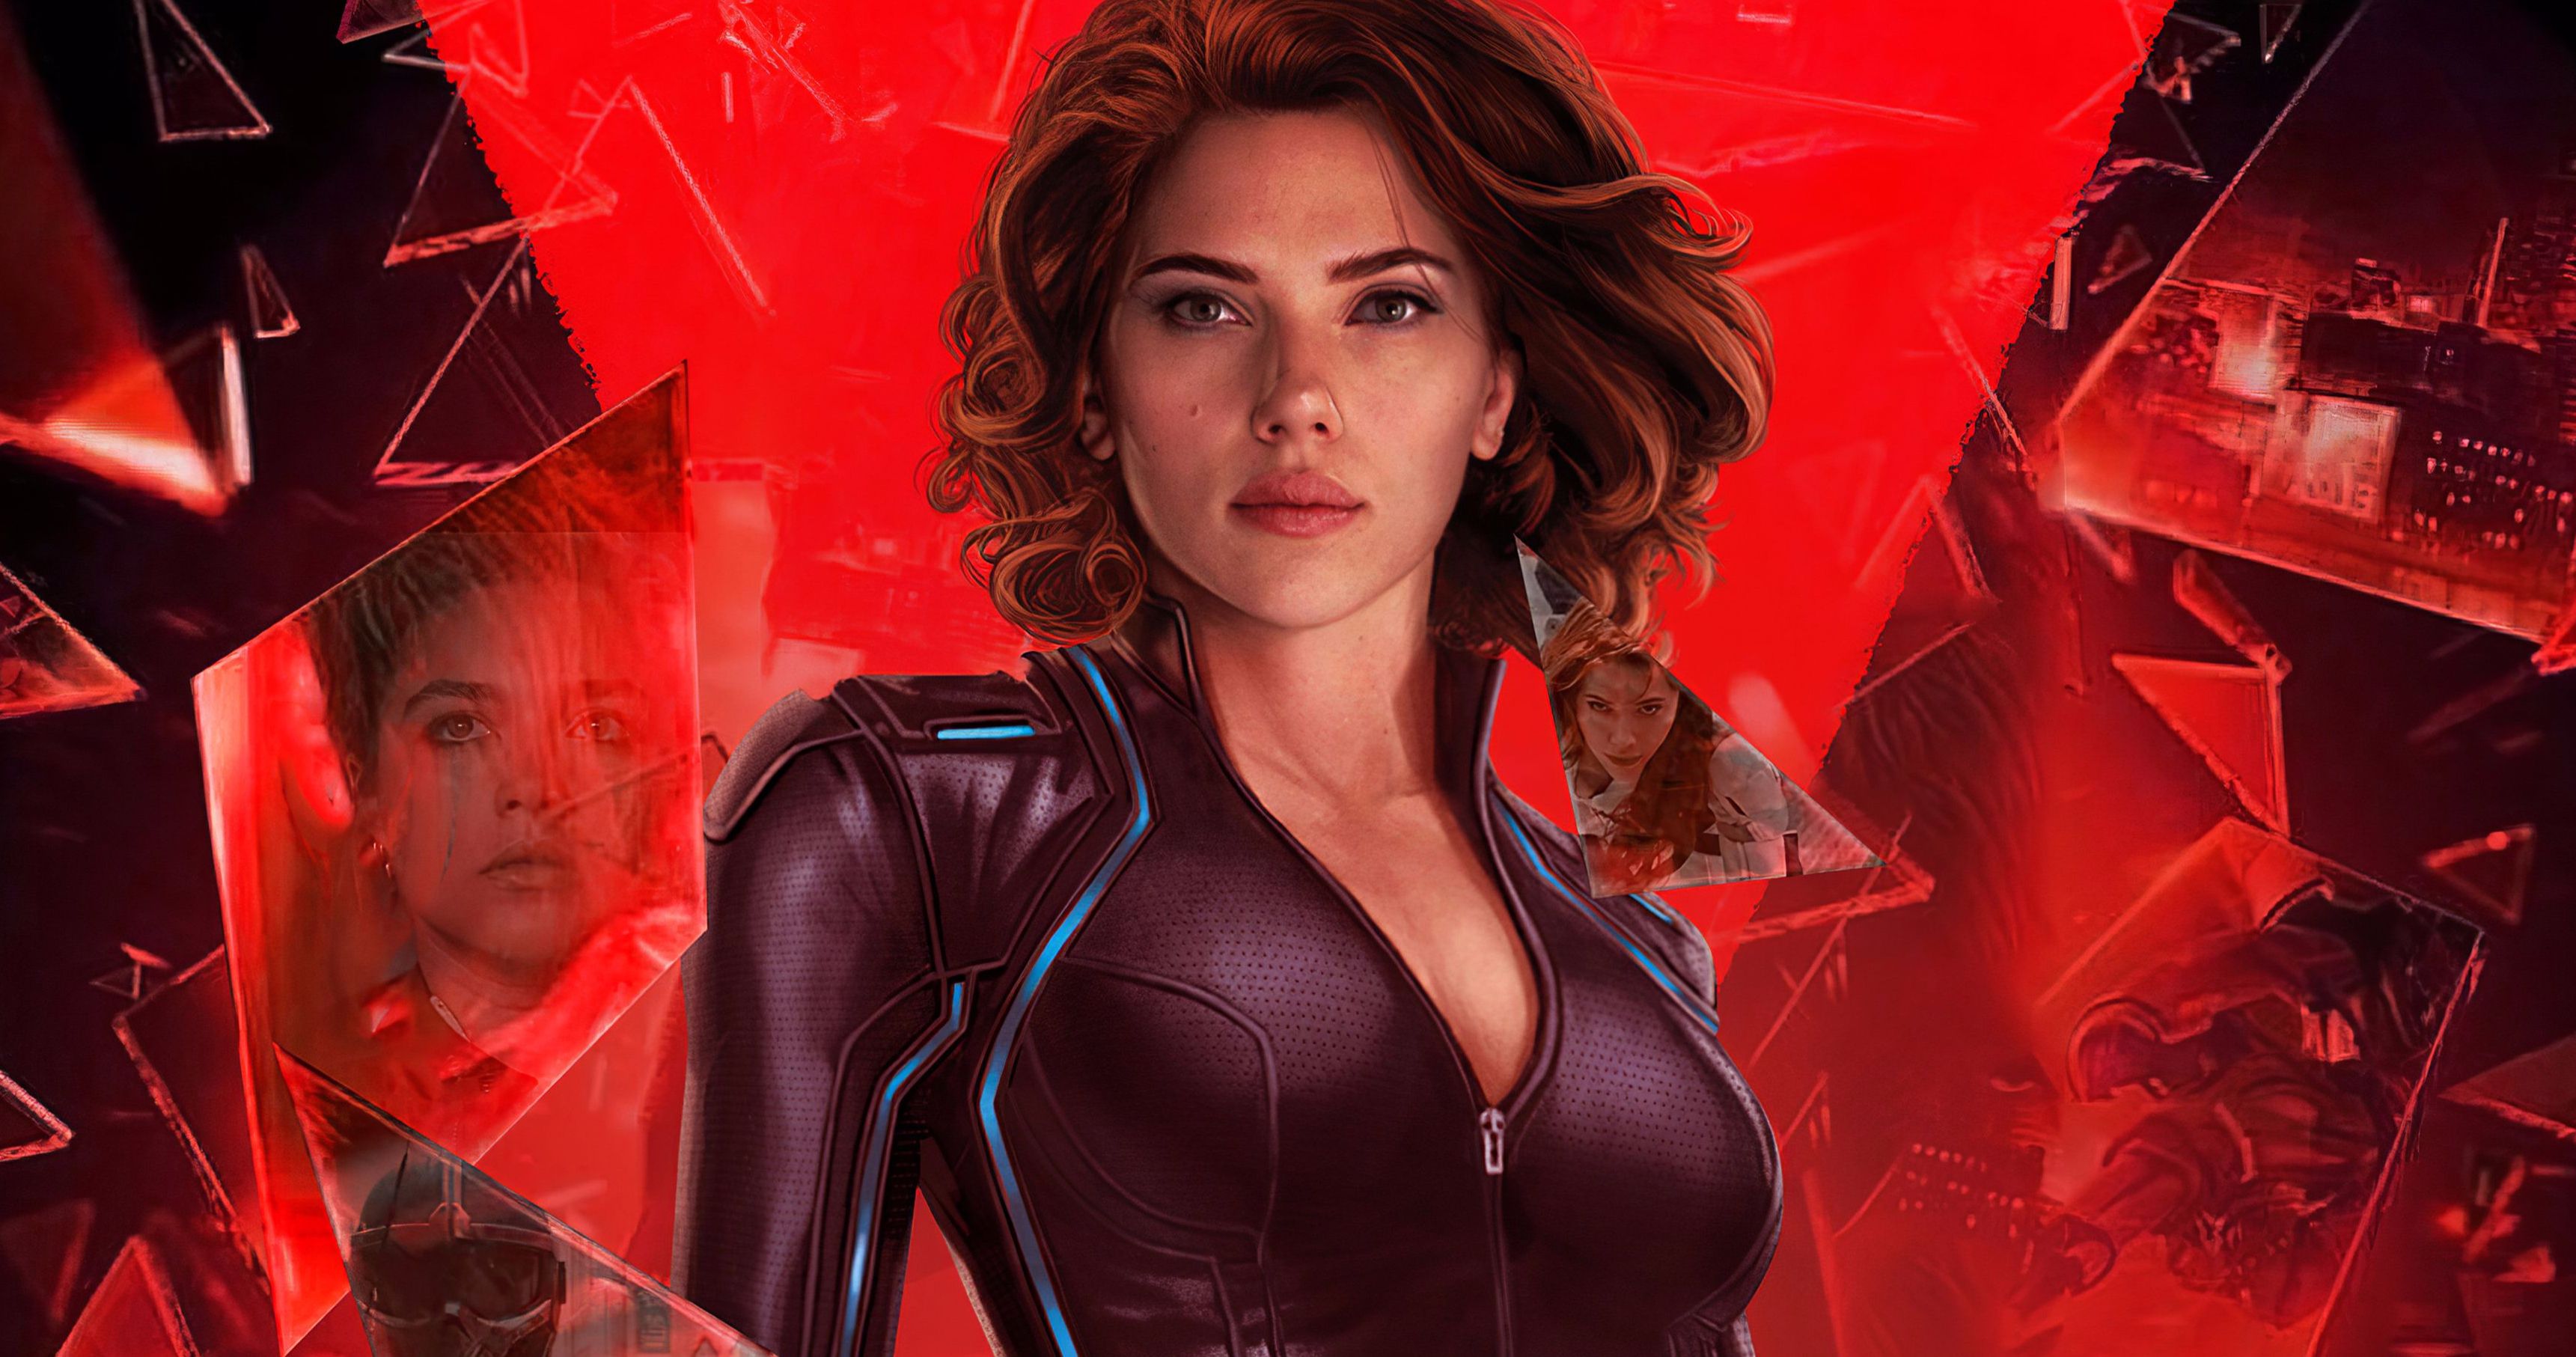 More Big Disney Movies Rumored to Debut on Disney+, But Black Widow Isn't One of Them?